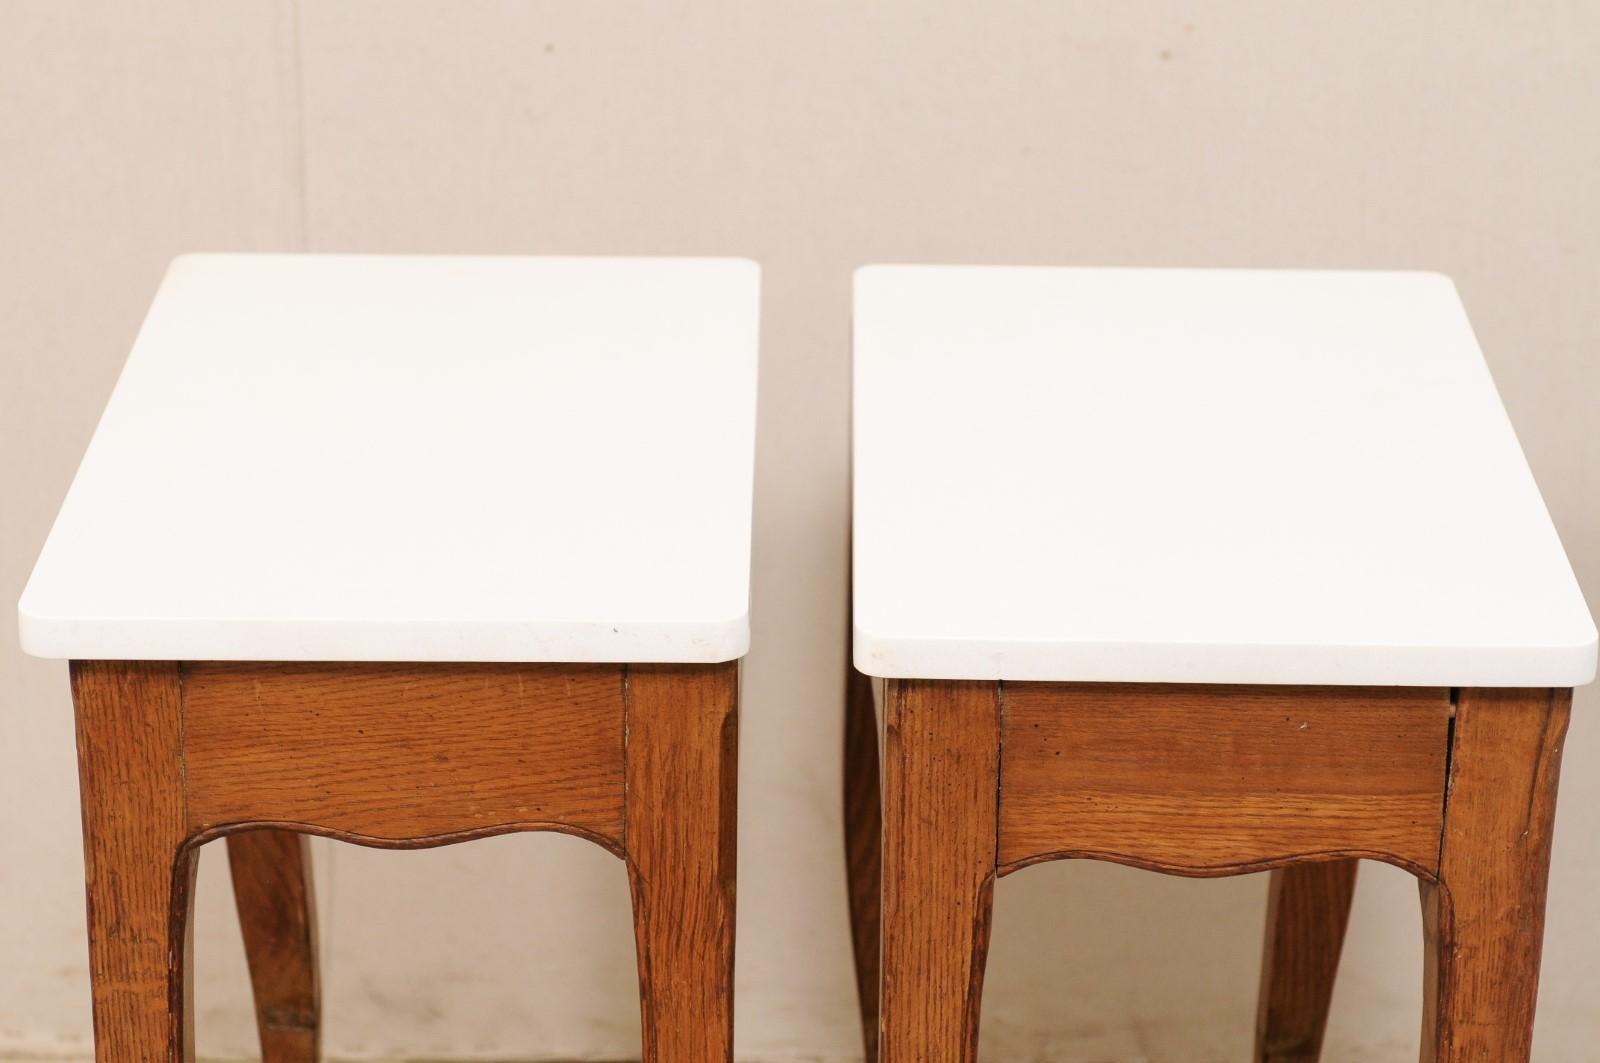 Pair of 1920s French Single-Drawer Side Tables with New White Quartz Tops For Sale 6